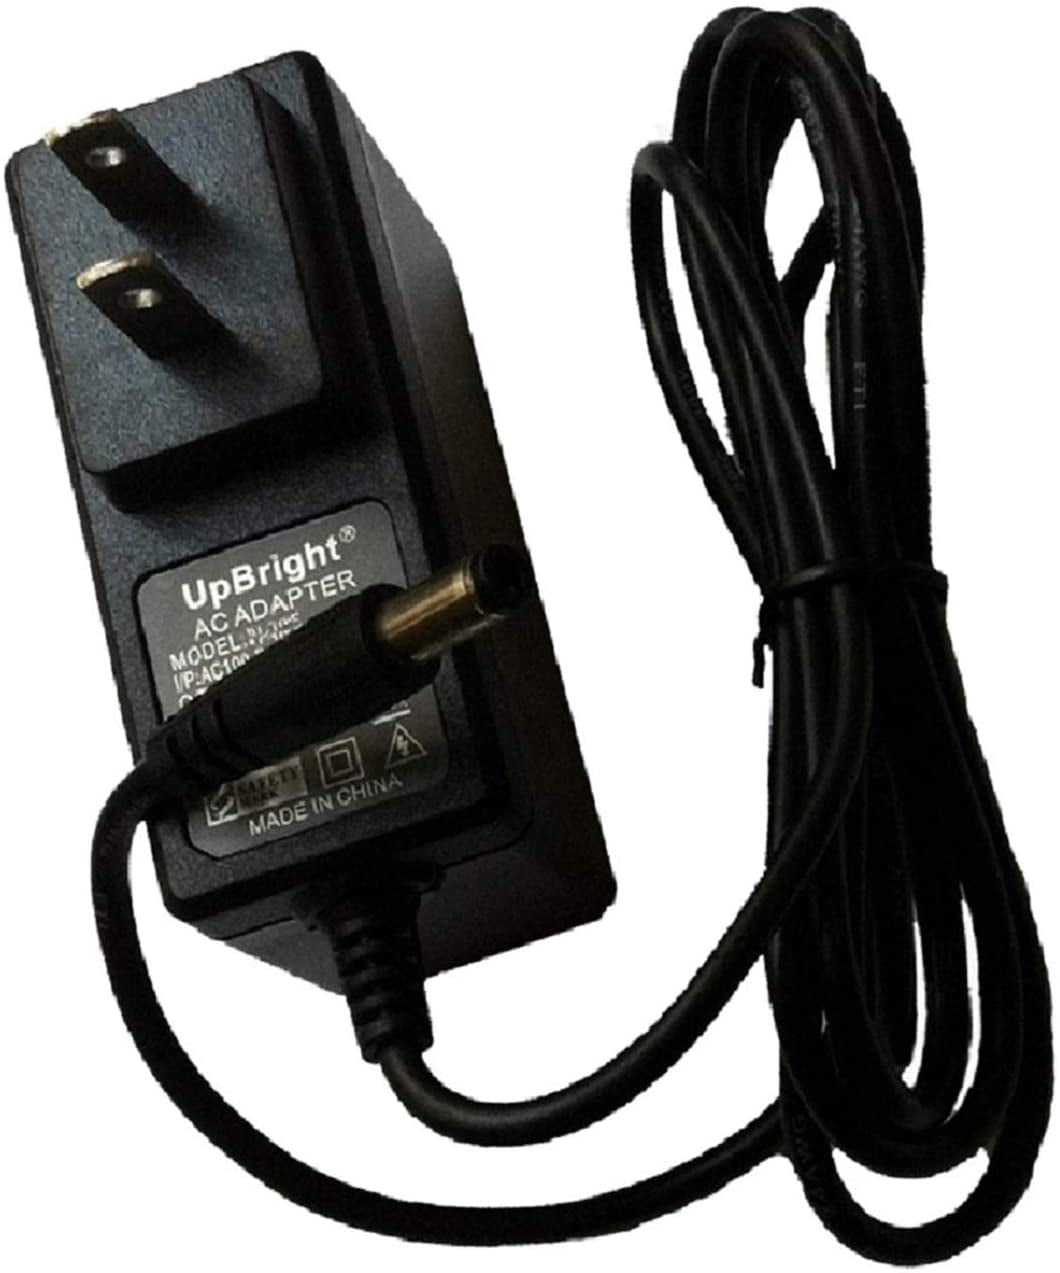 WK-1250 Keyboard Piano DC 12v 12 VOLT Power Supply Adapter for Casio WK-1200 